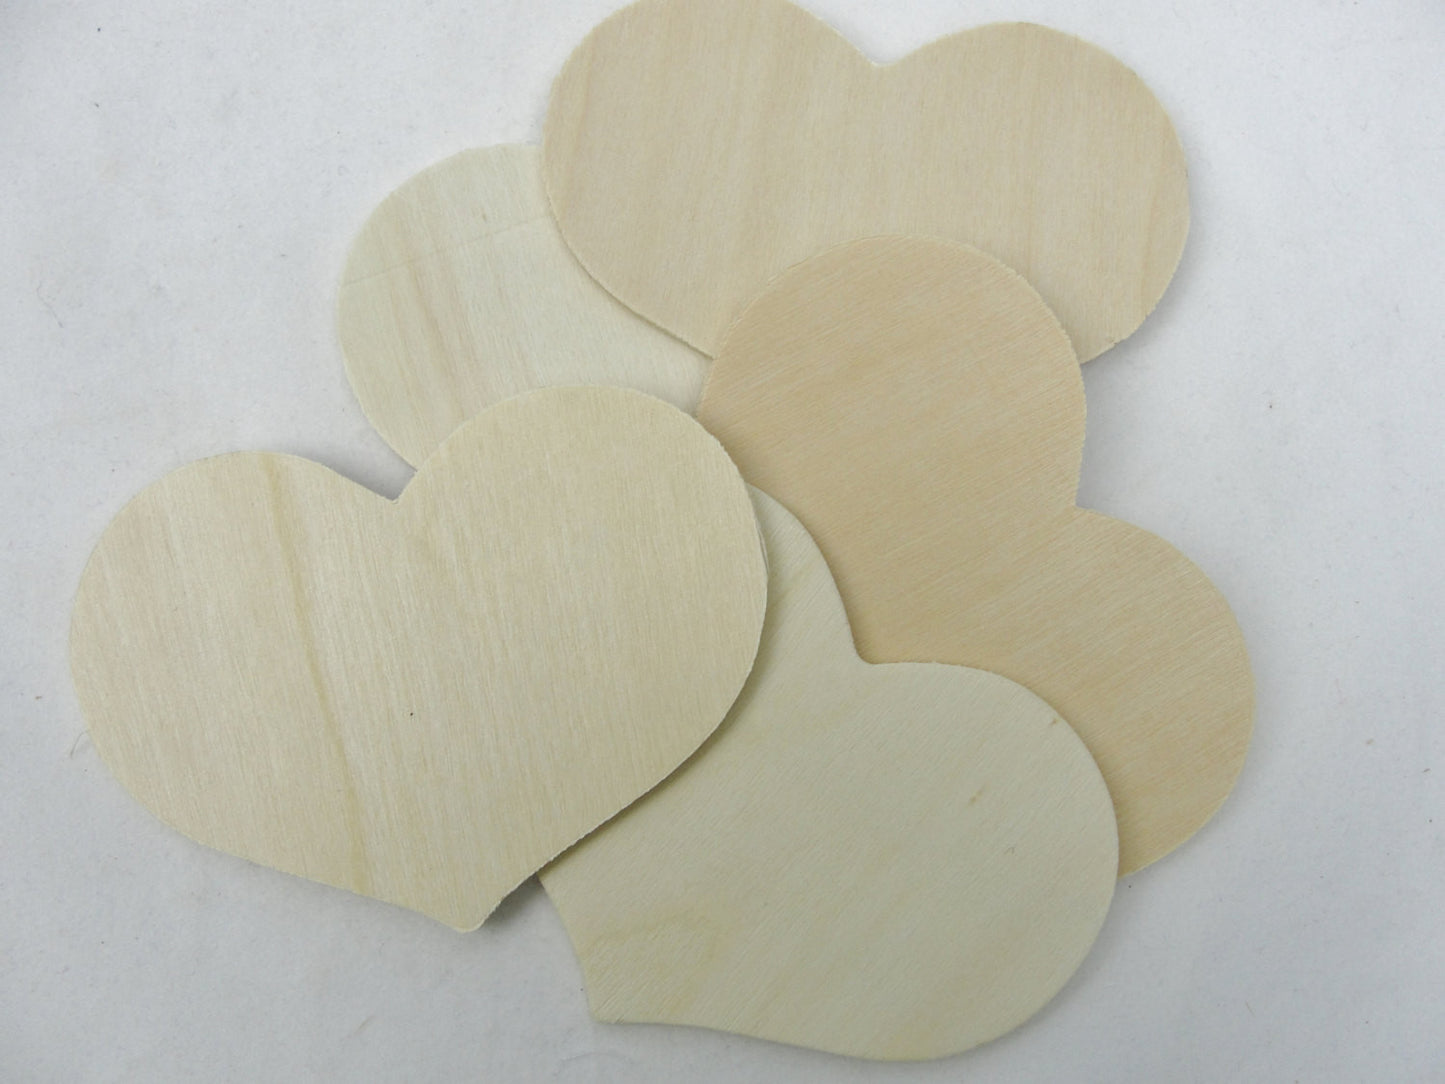 5 wooden country hearts 3 3/8" wide 2 1/2" tall 1/8" thick unfinished - Wood parts - Craft Supply House